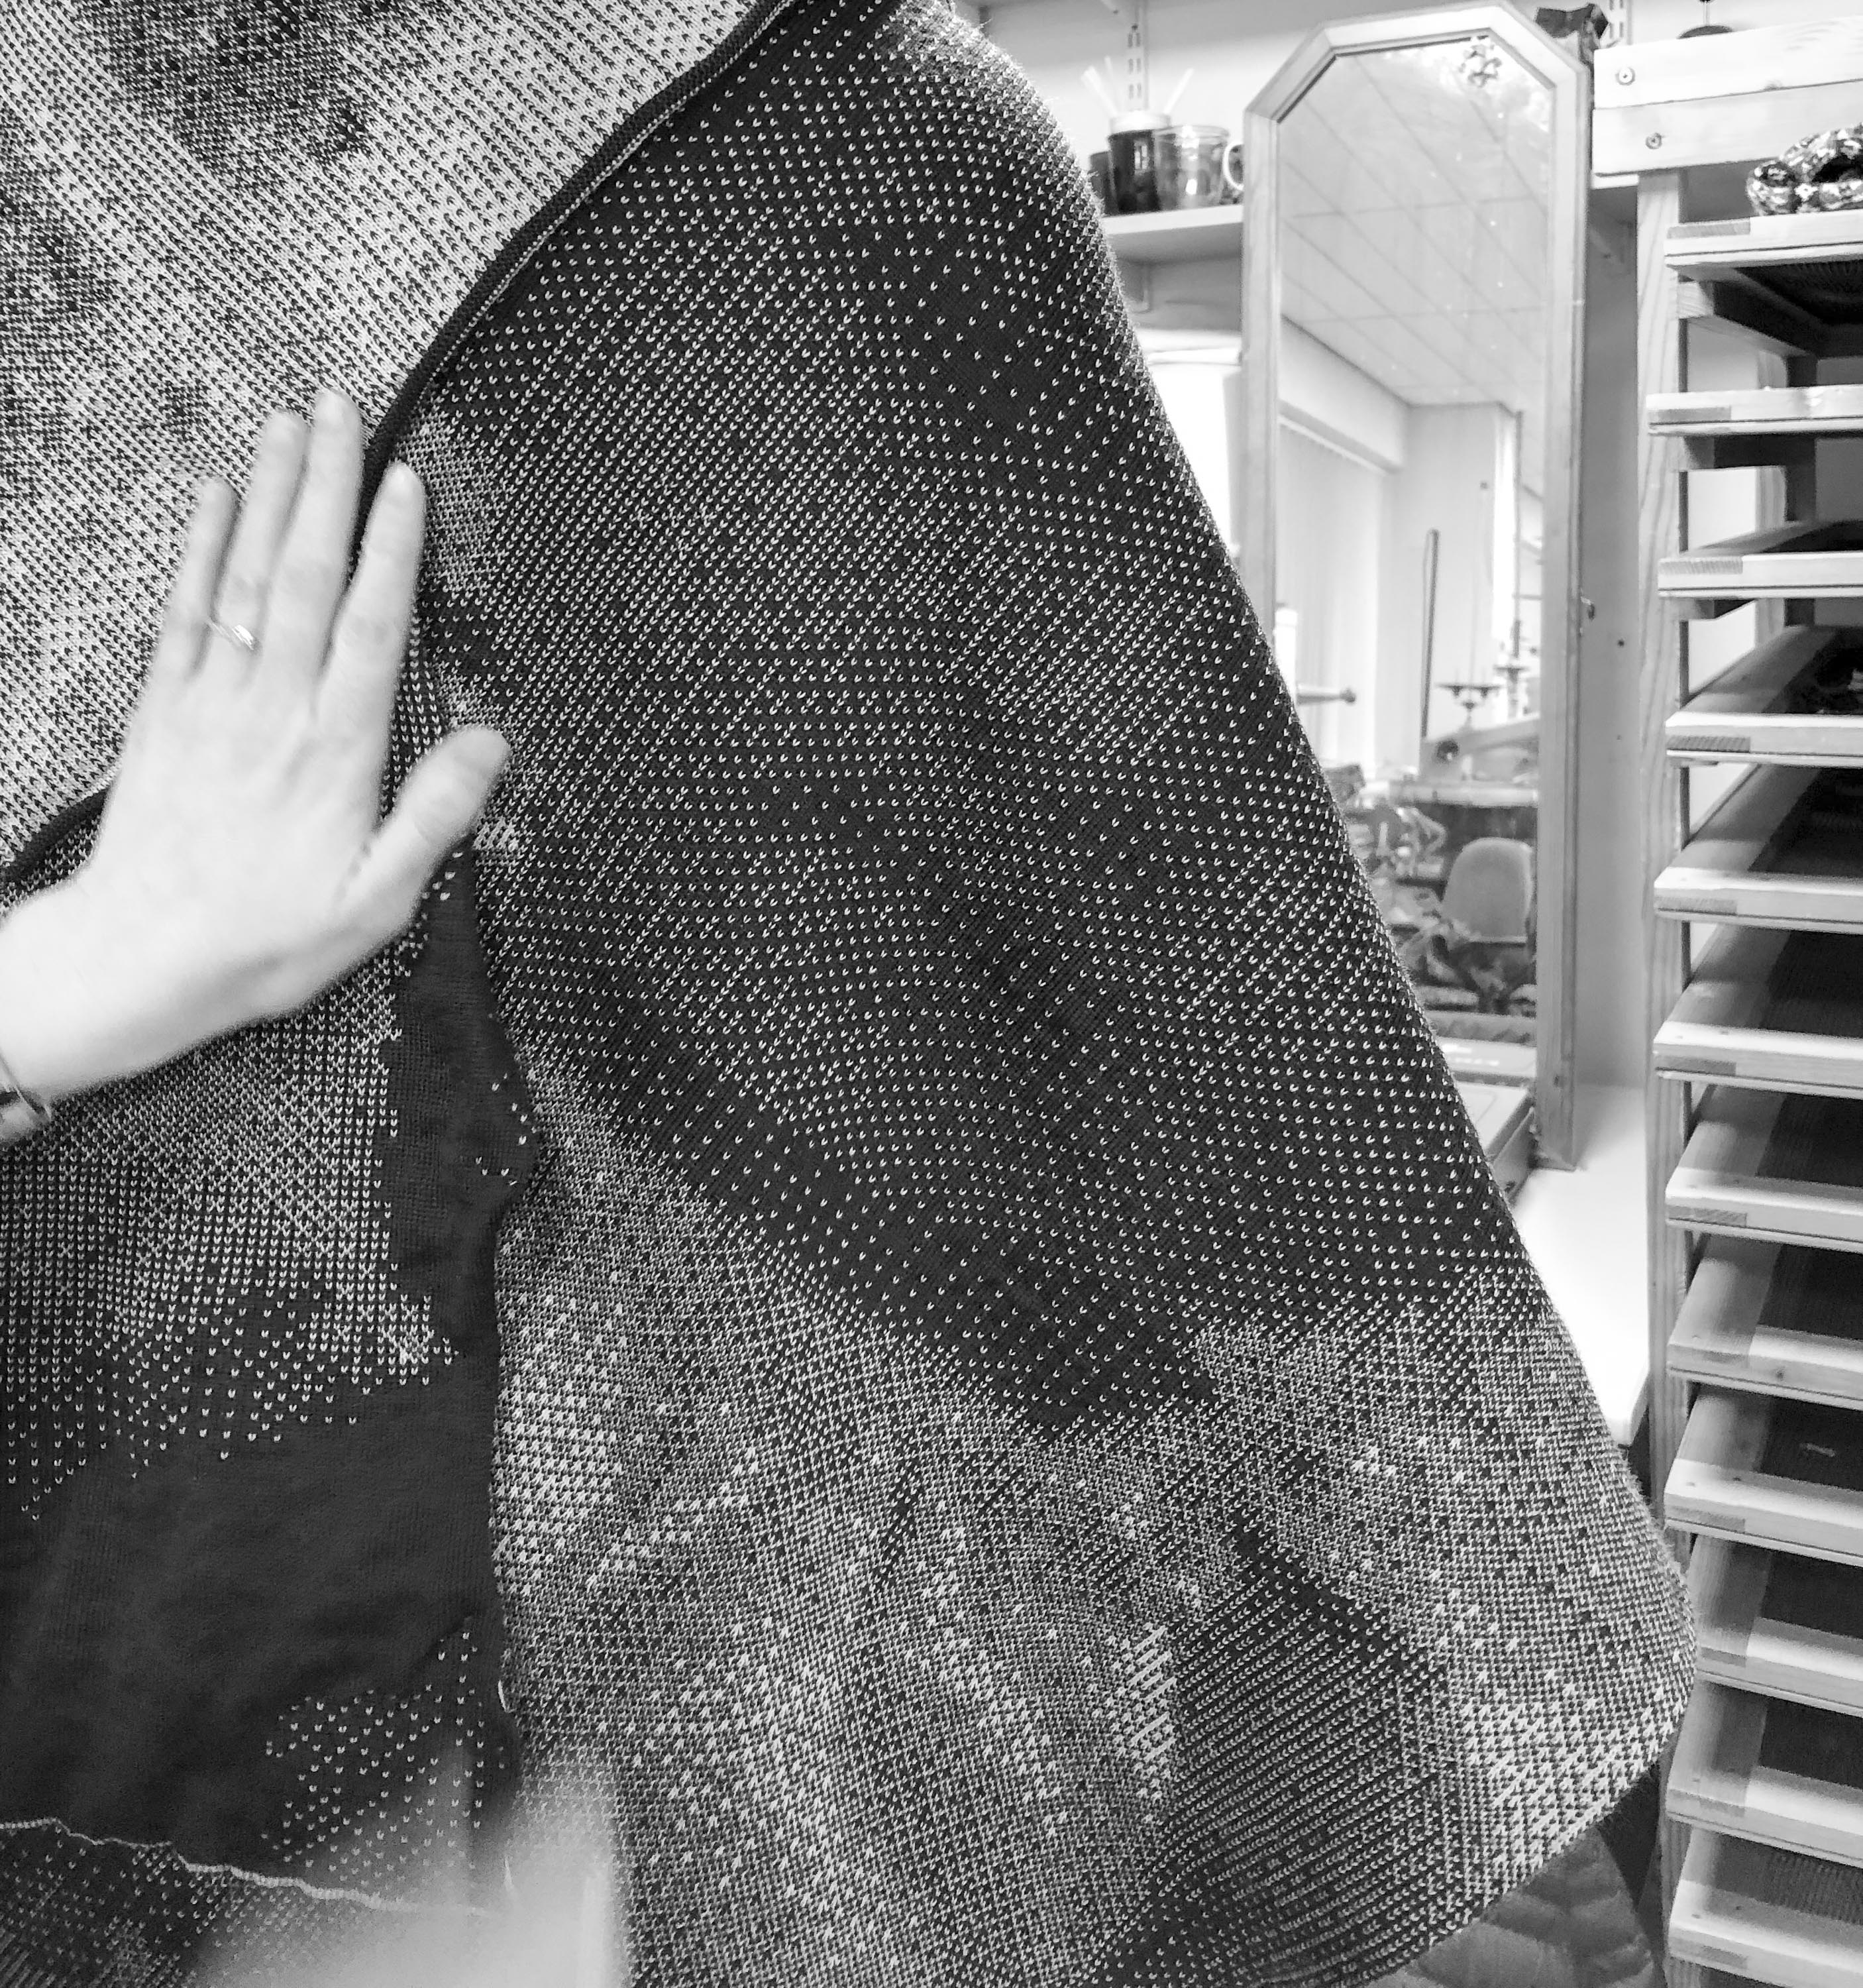 A prototype piece of Rani knitwear in the knitting room, experimenting with pattern and layout of photographs